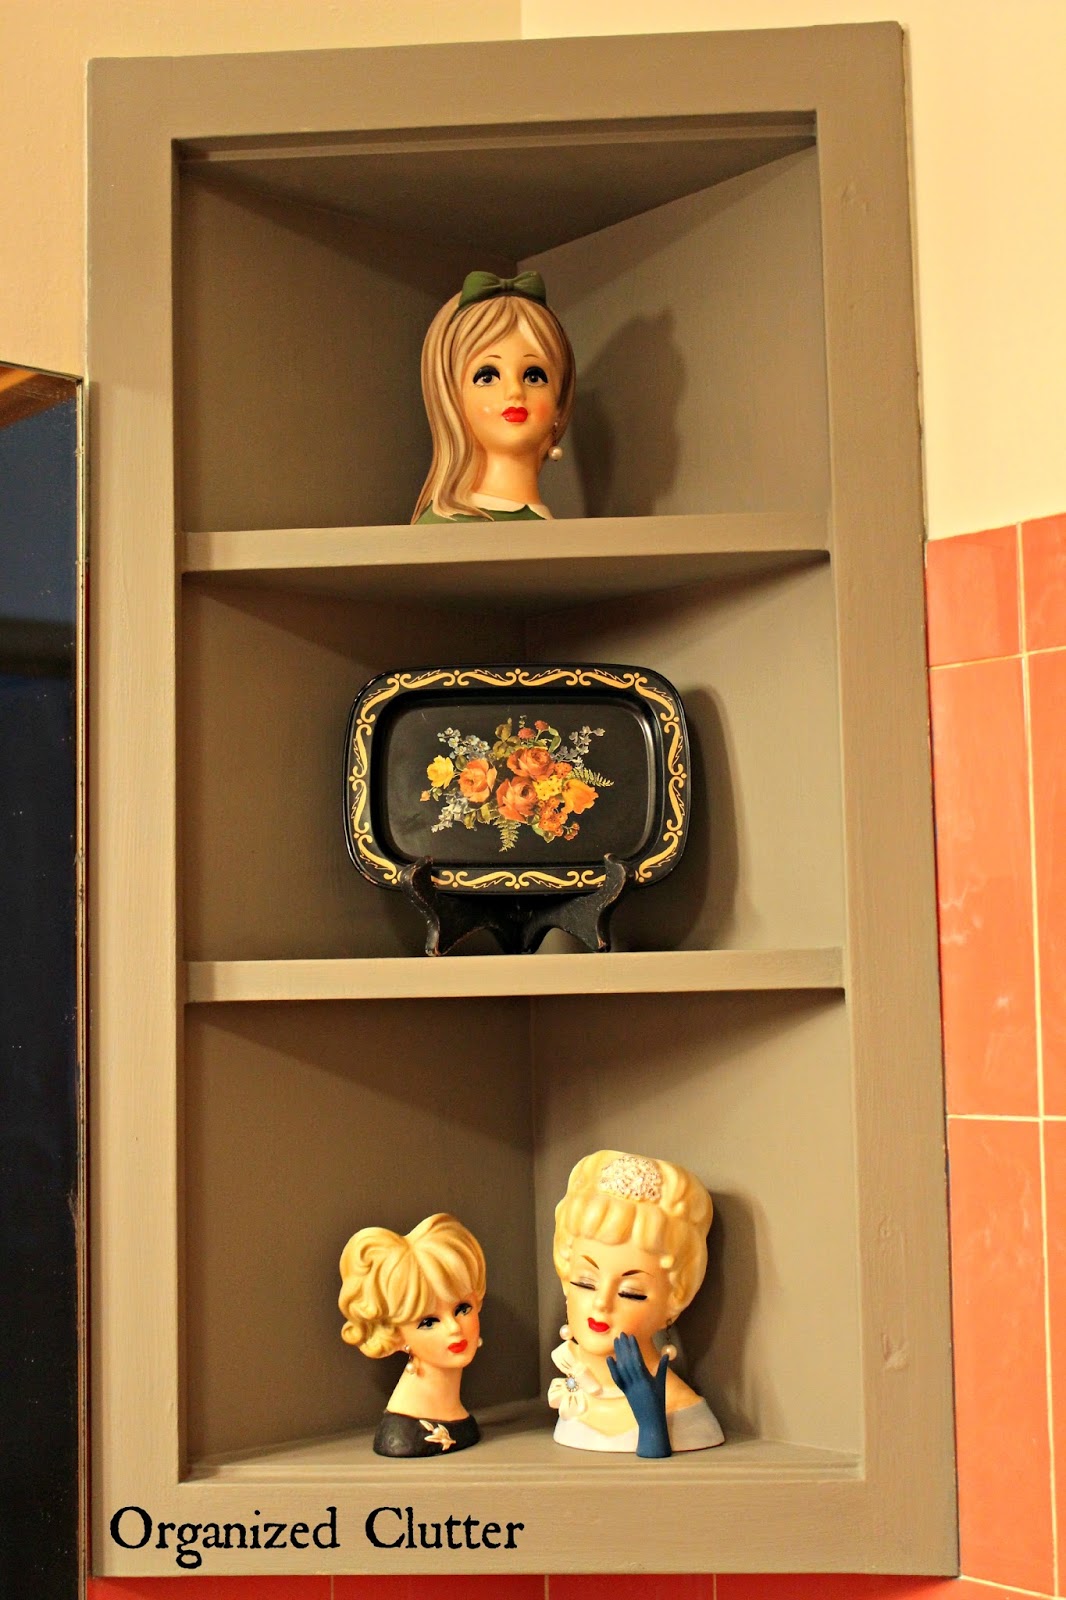 Head Vases & Tole Trays in a Vintage Bathroom www.organizedclutterqueen.blogspot.com